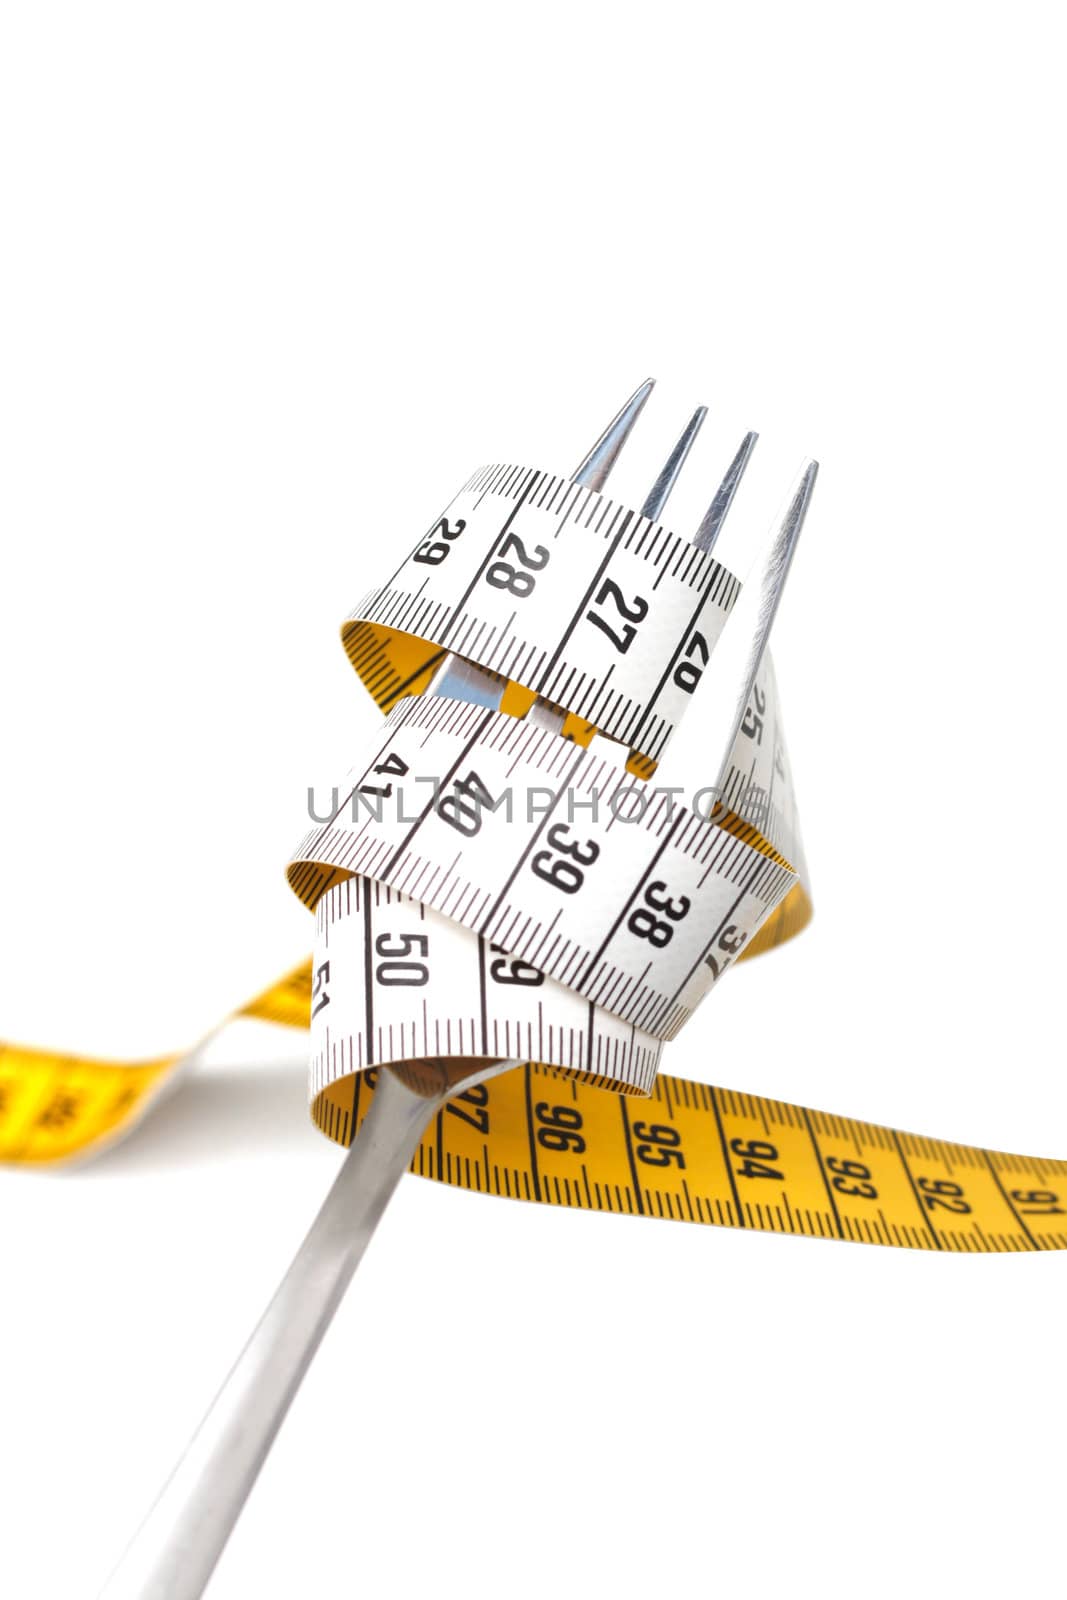 Conceptual image of dieting